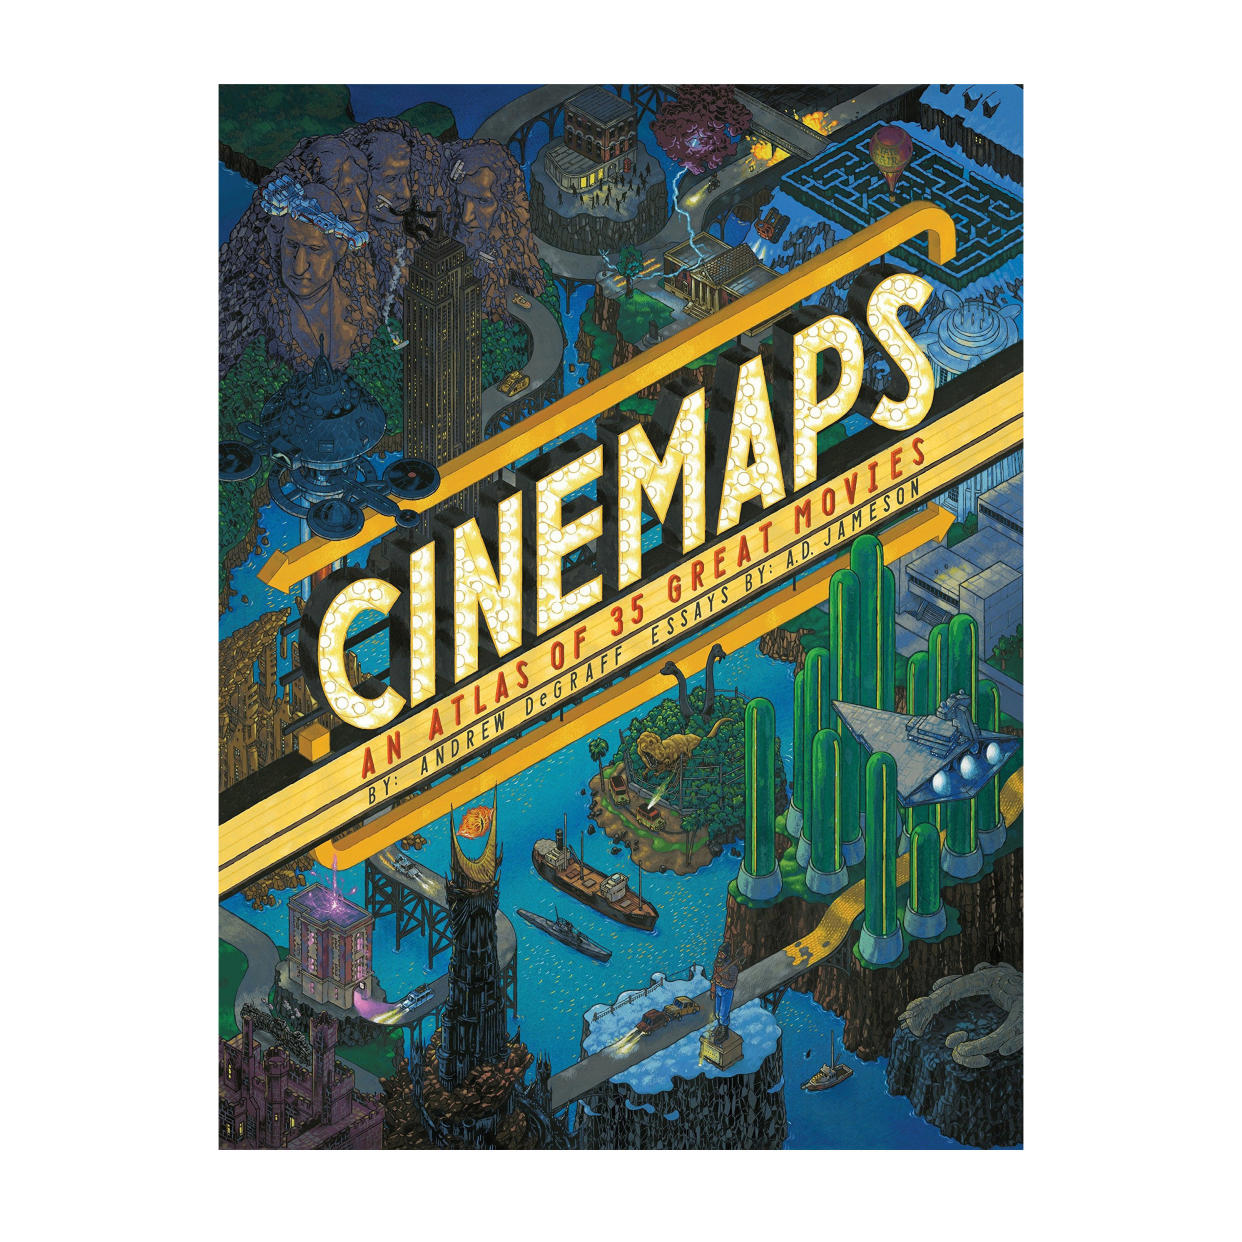 Cinemaps: An Atlas of 35 Great Movies by Andrew DeGraff